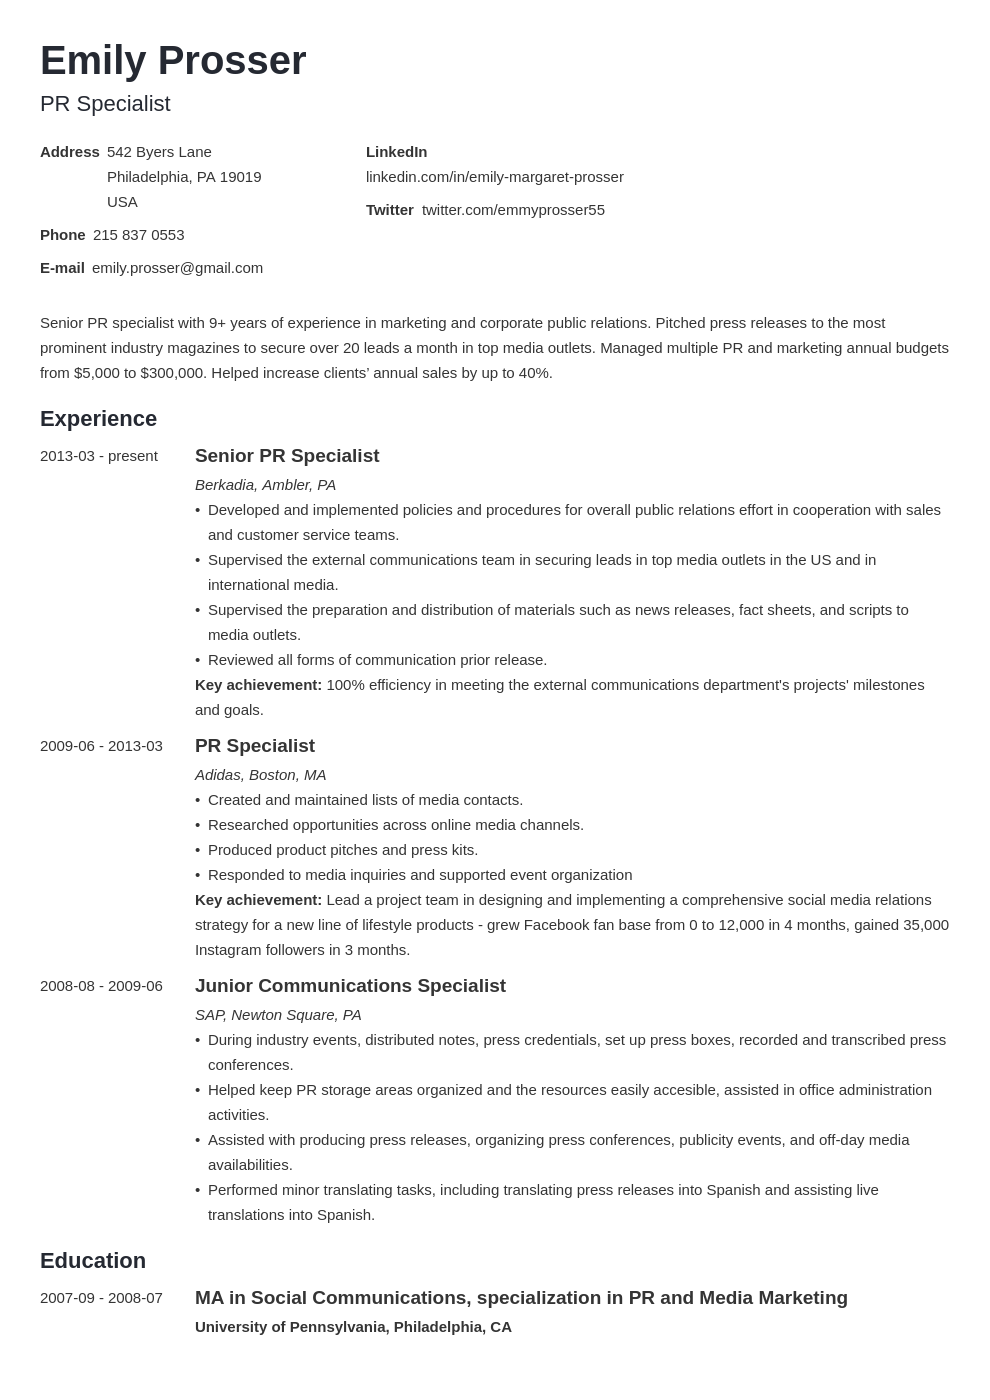 resume-template-for-high-school-students-in-google-docs-word-etsy-australia